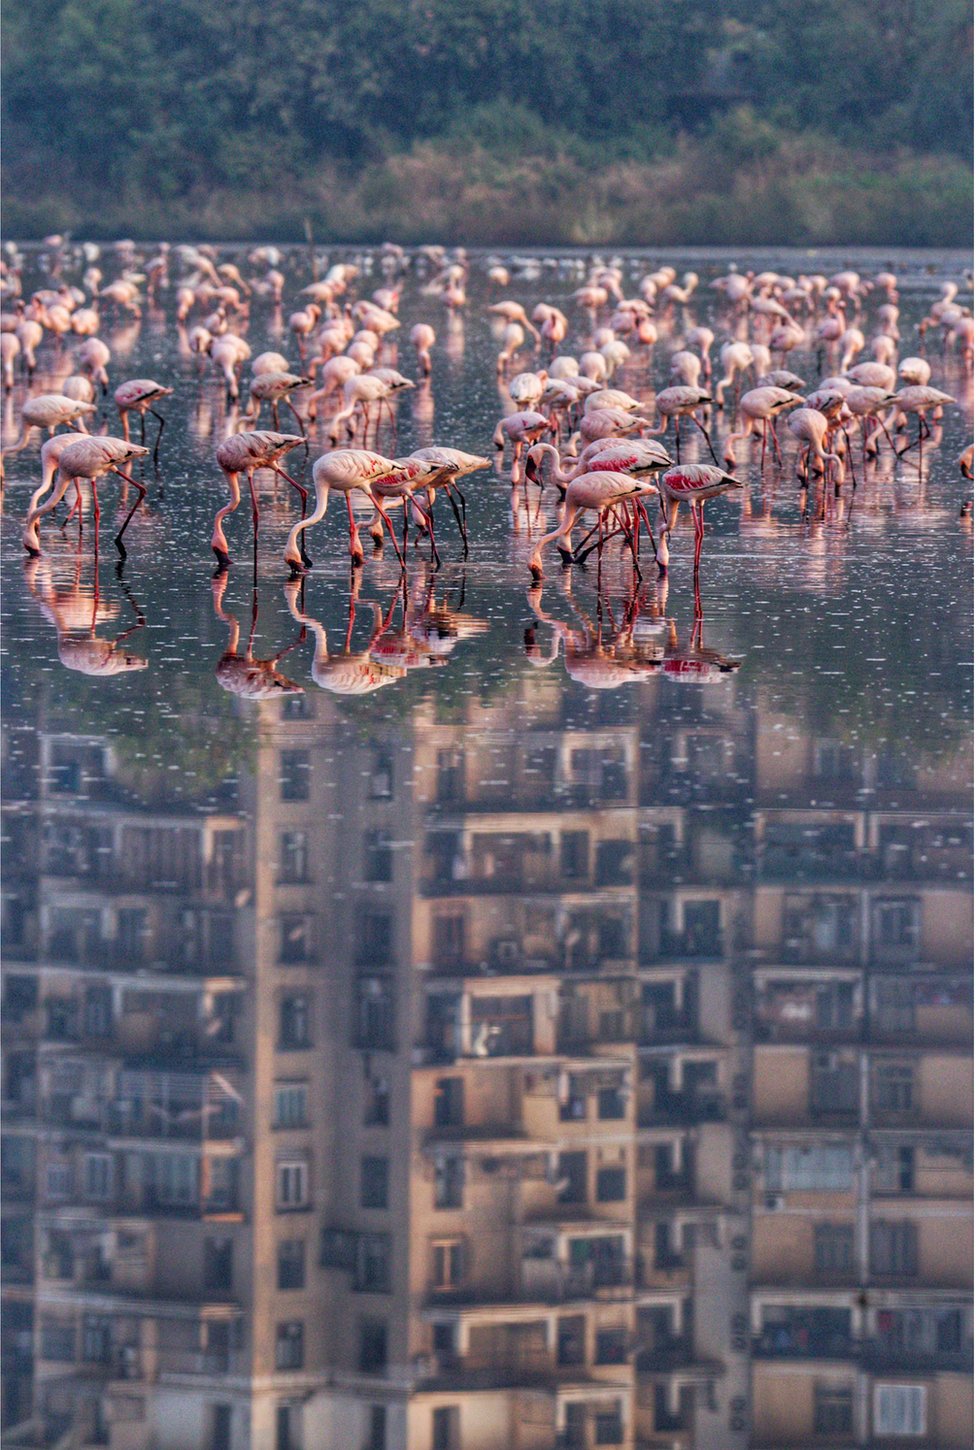 A flock of flamingos feed in water with a block of flats reflected in the background